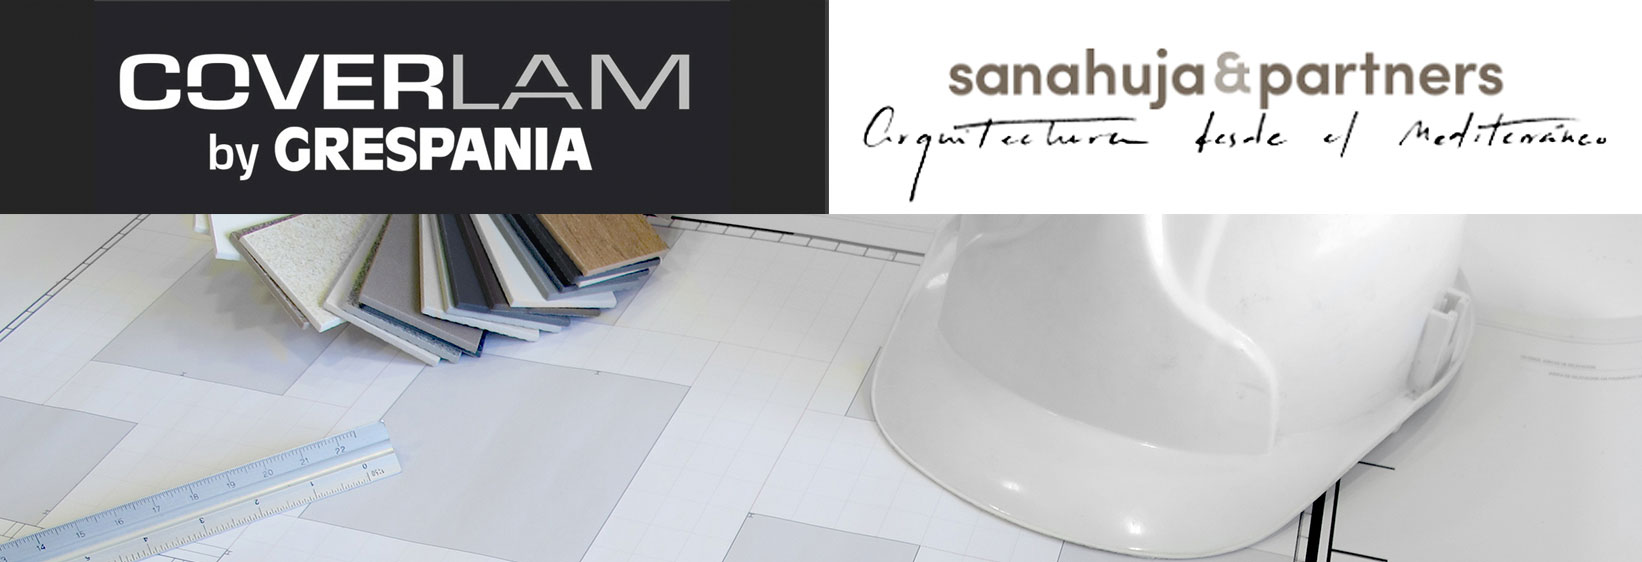 GRESPANIA PUTS THE FINISHING TOUCHES TO ITS NEW SHOWROOM DESIGNED EXCLUSIVELY FOR COVERLAM.